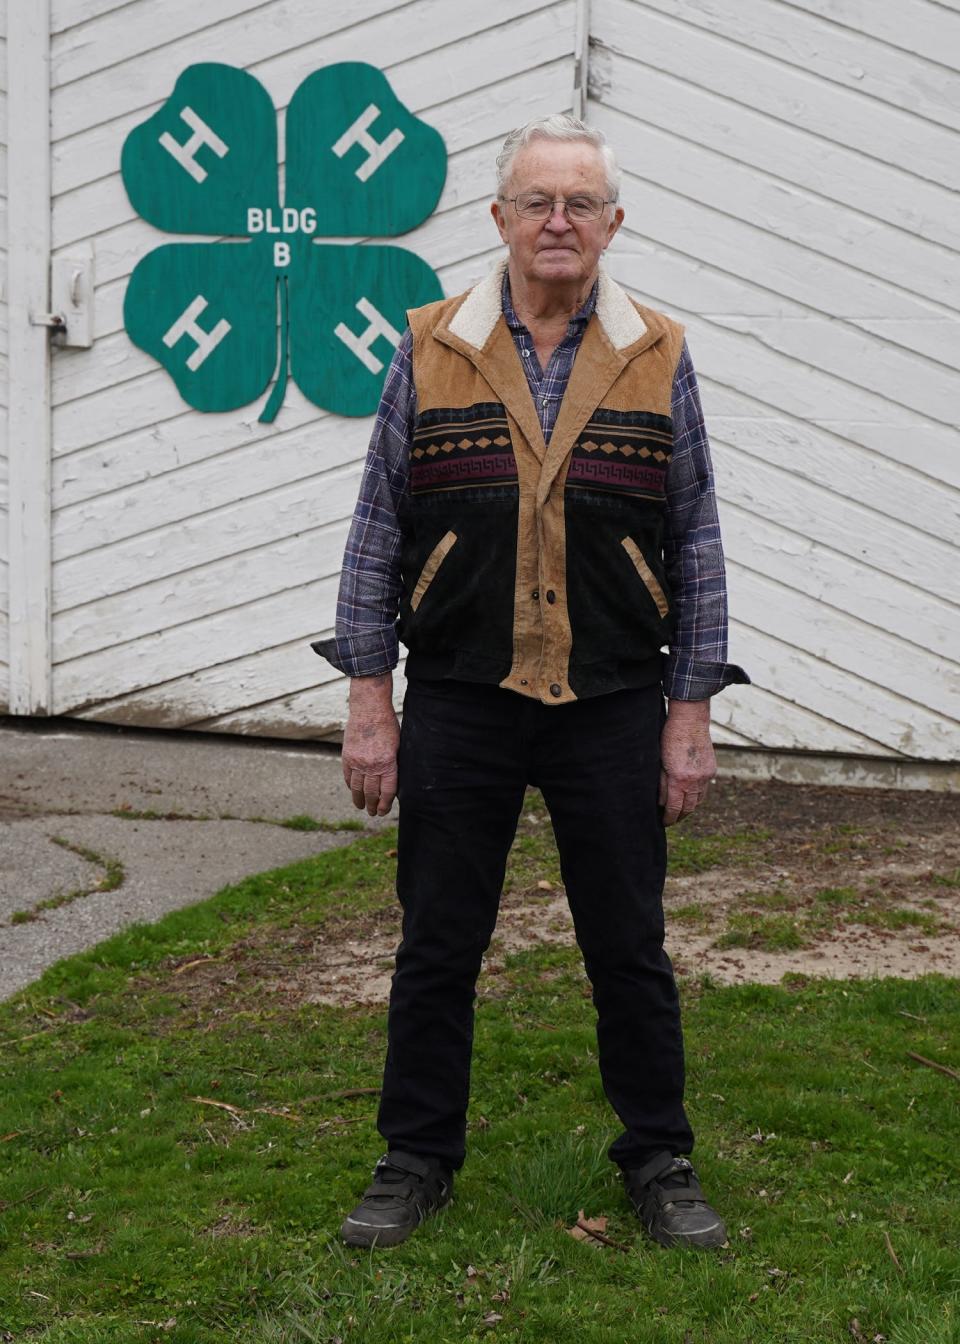 Dr. Howard Pennington, 88,  is a former veterinarian who is still very active in 4-H, Kiwanis, at his church as well as sawing wood, planting trees and tending to his garden. "I don't let the old man in. I'm very active and blessed," he said.